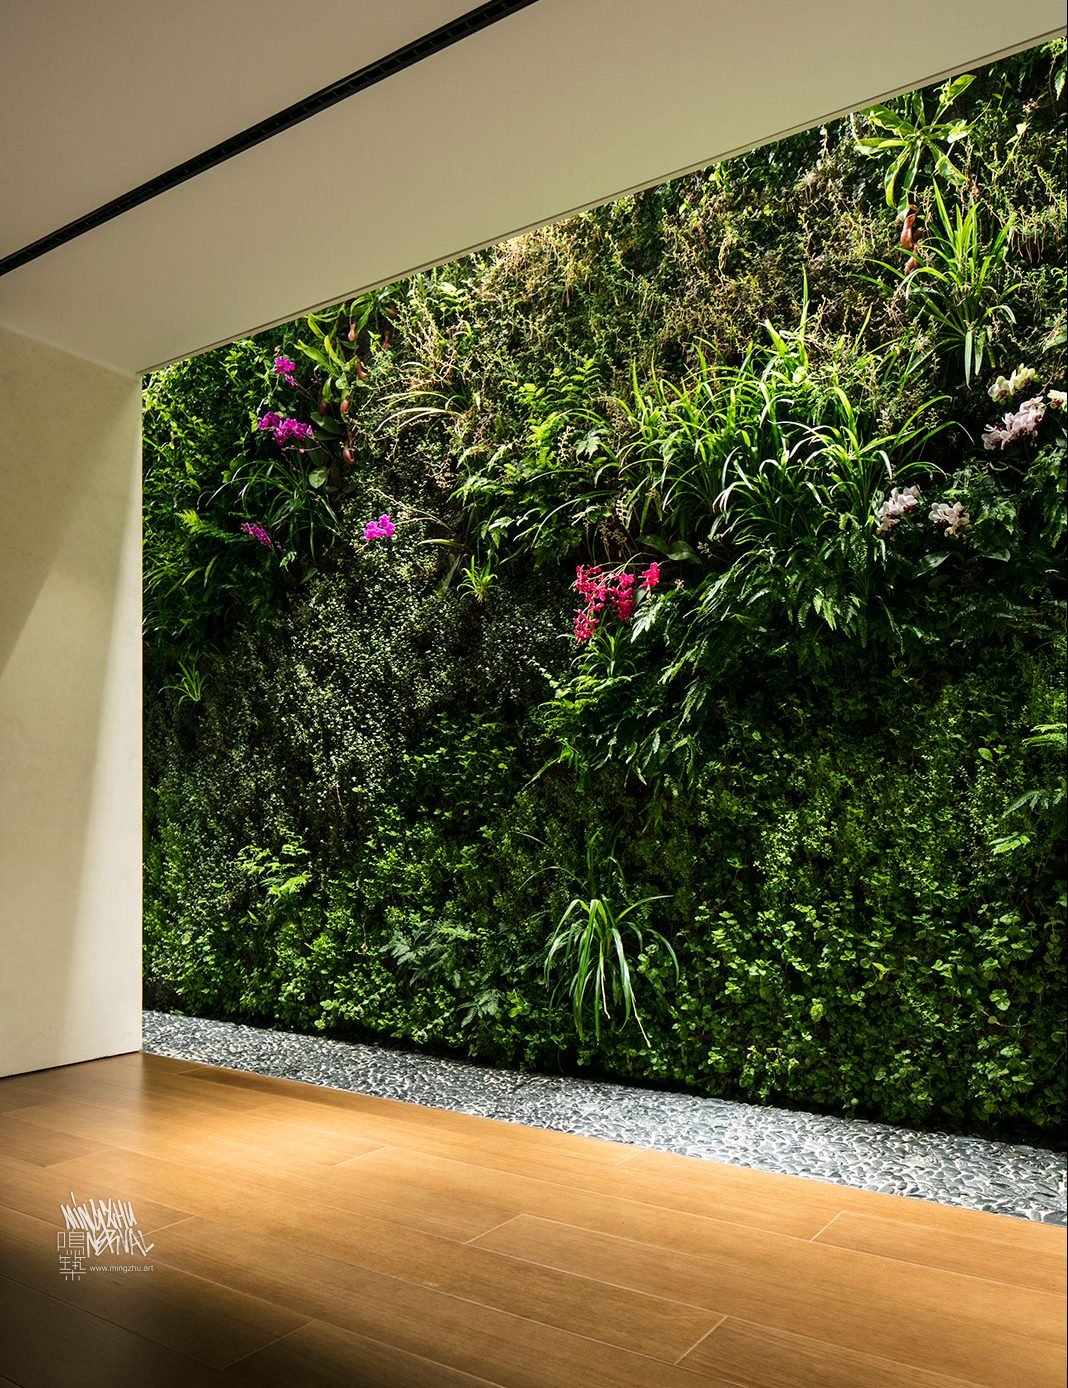 Mingzhu Nerval vertical living wall experts created the garden design for this luxury home villa in Hong Kong, 2016